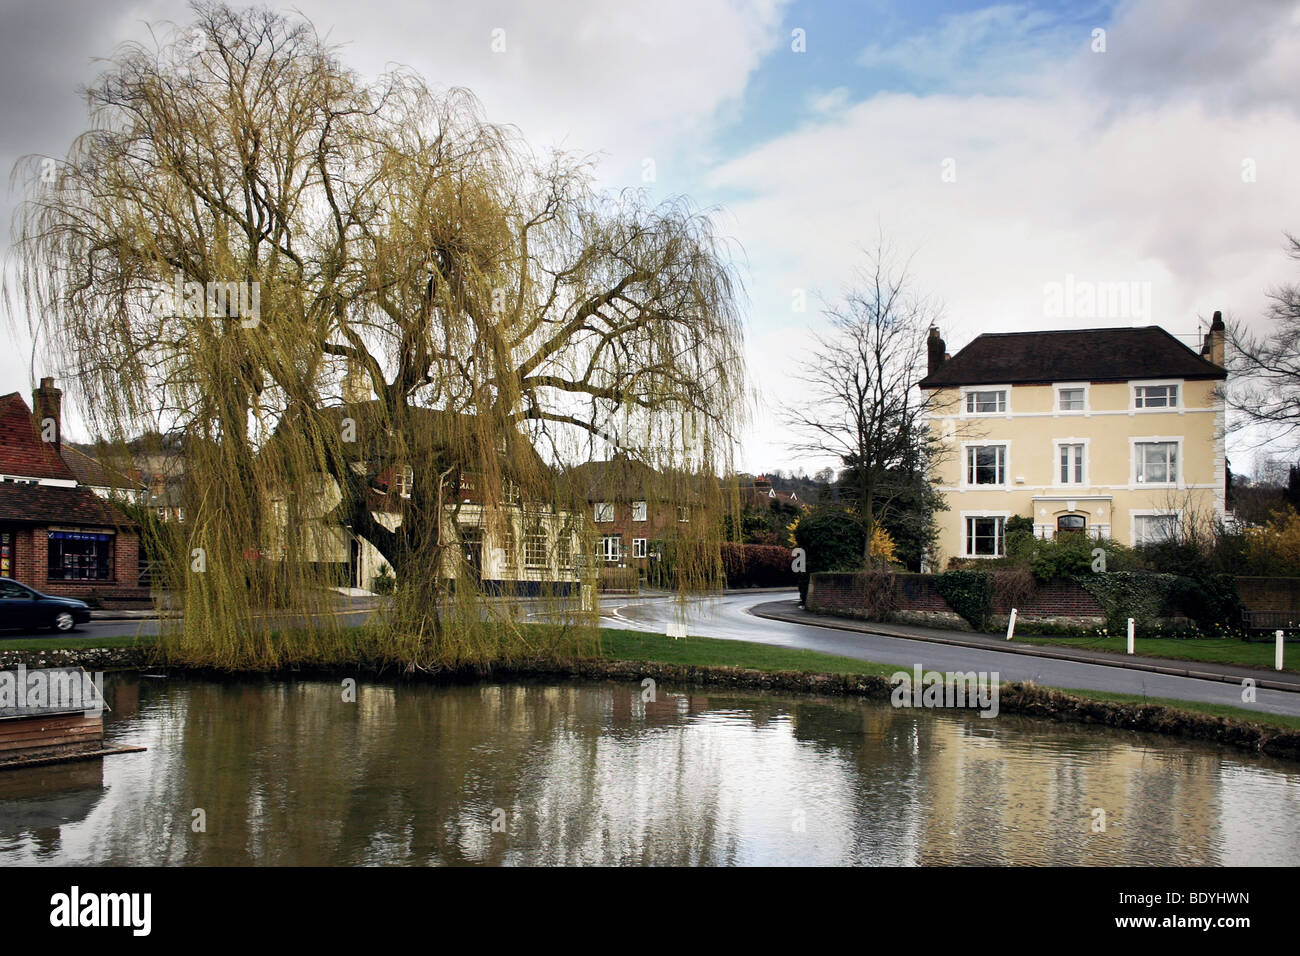 A view of the village pond and the weeping willow tree at Shoreham in Kent Stock Photo